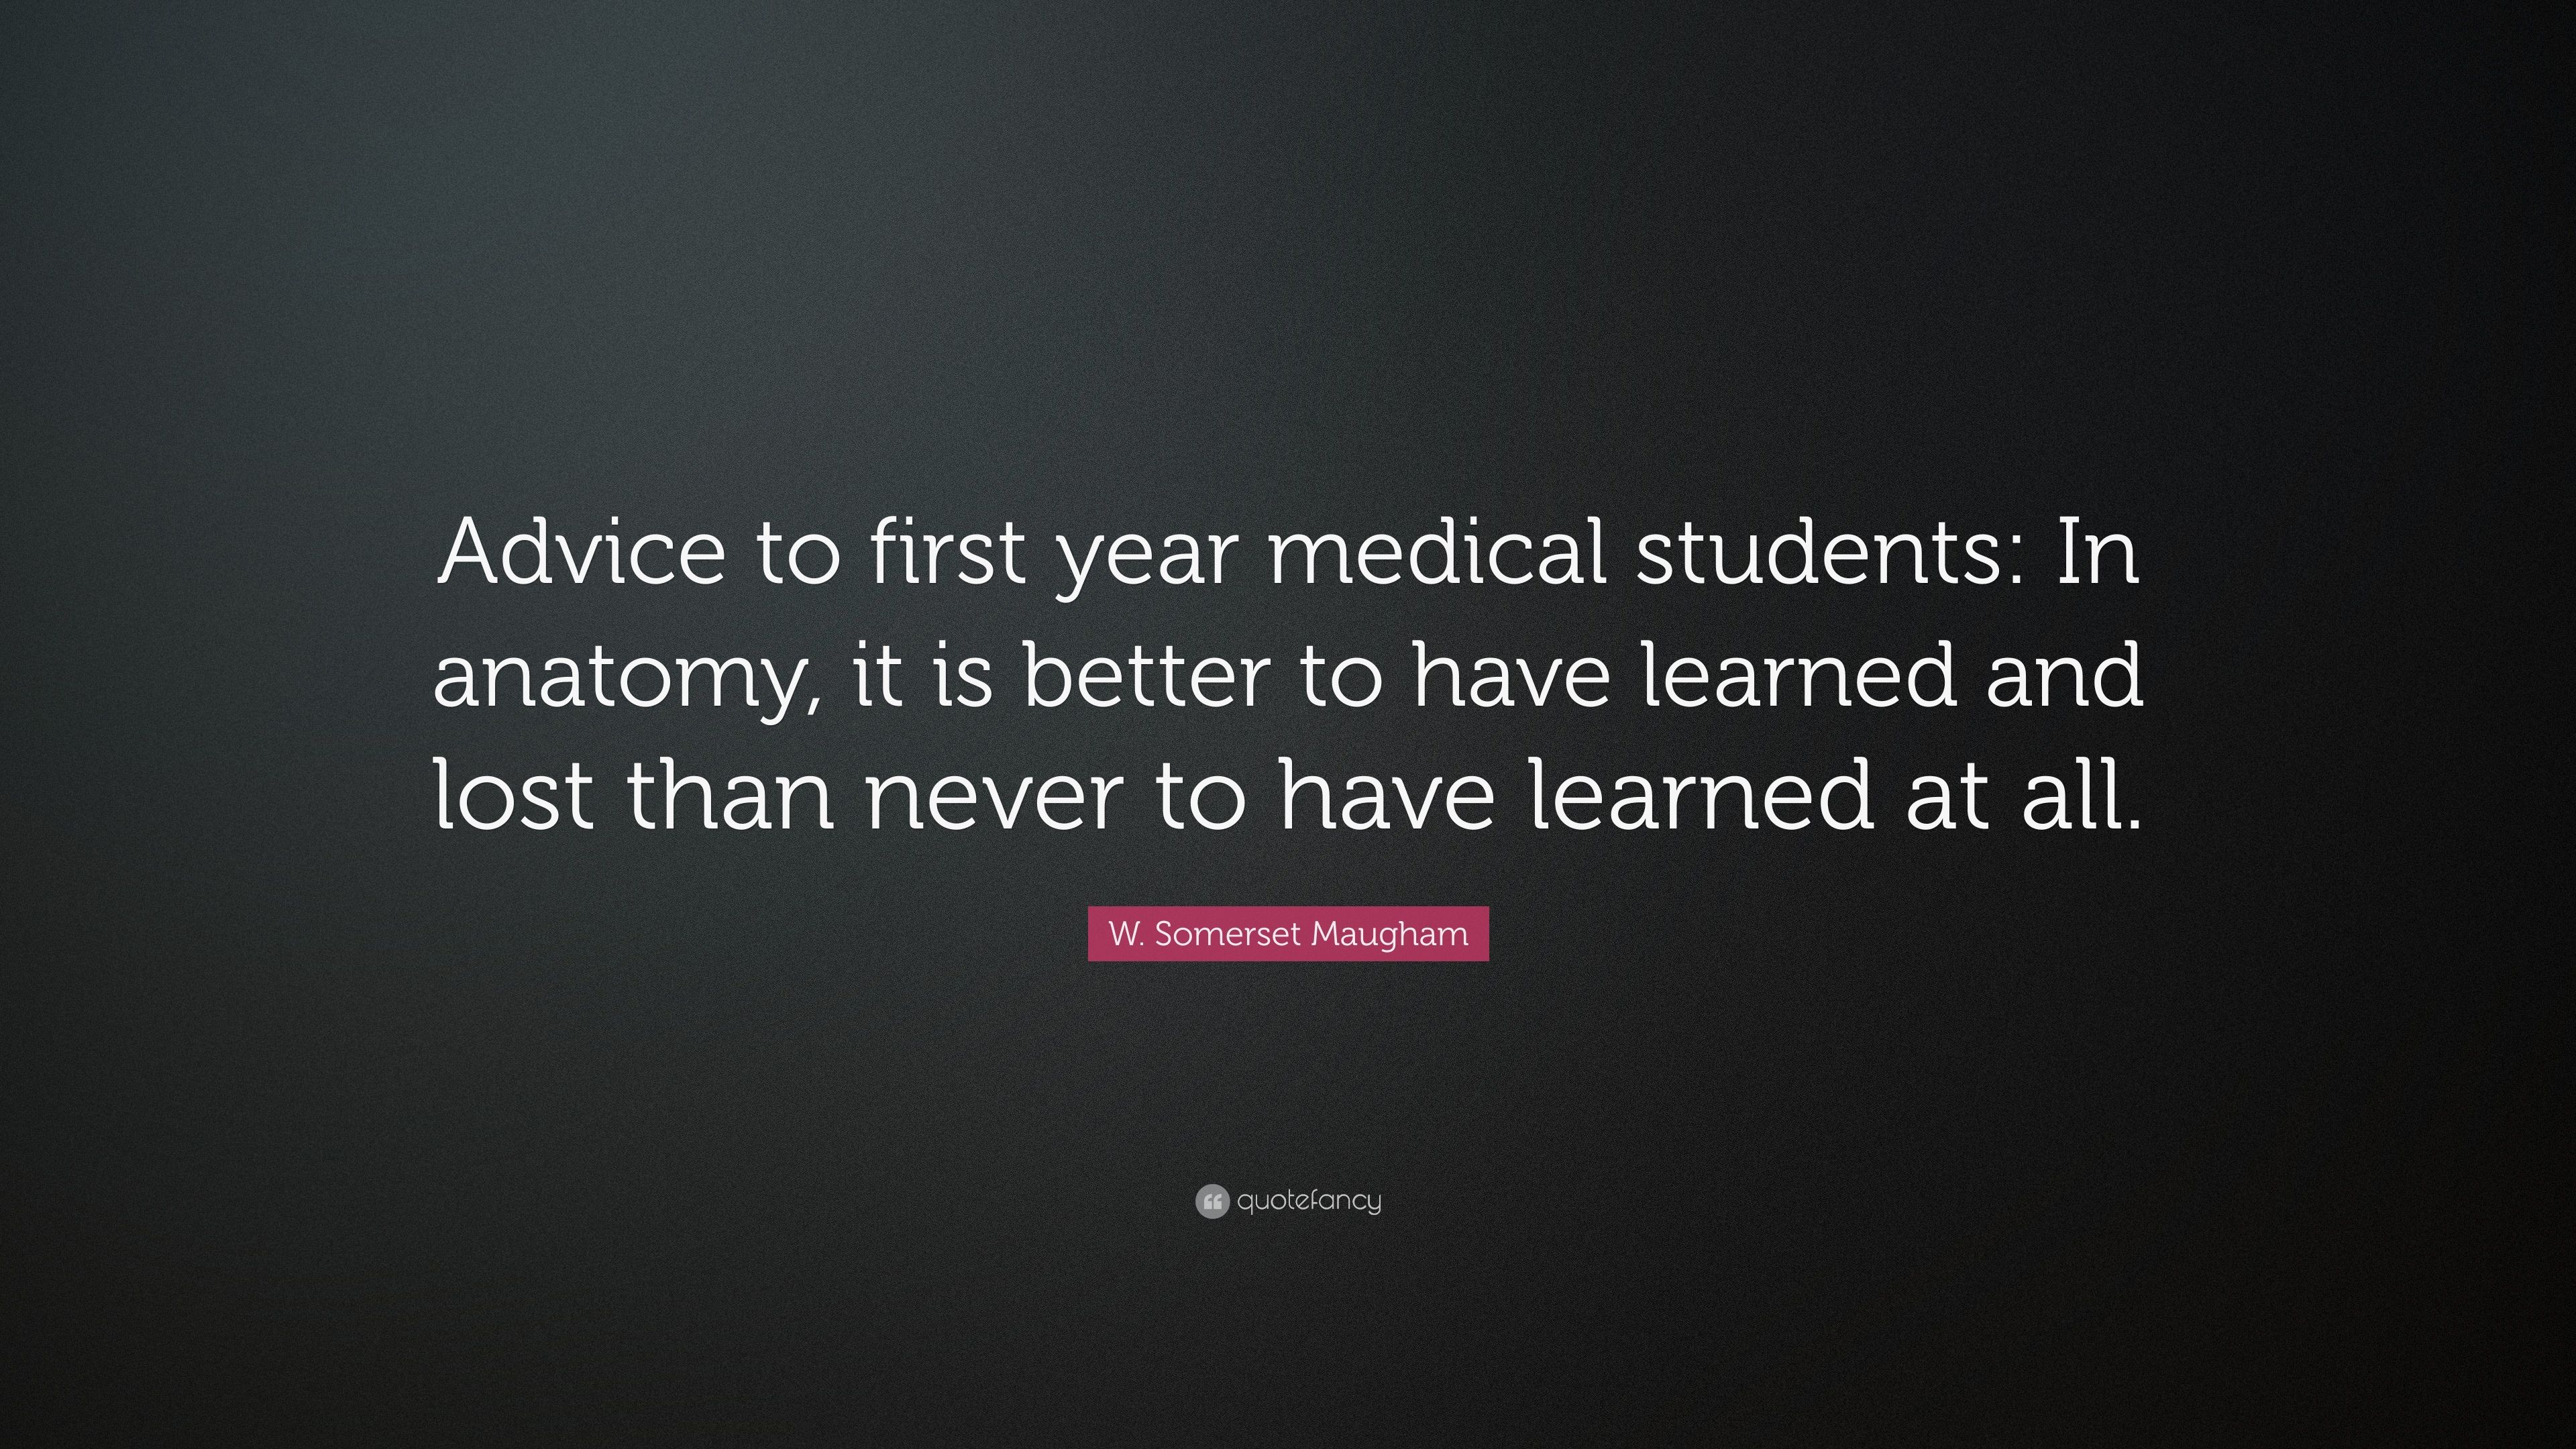 W. Somerset Maugham Quote: “Advice to first year medical students